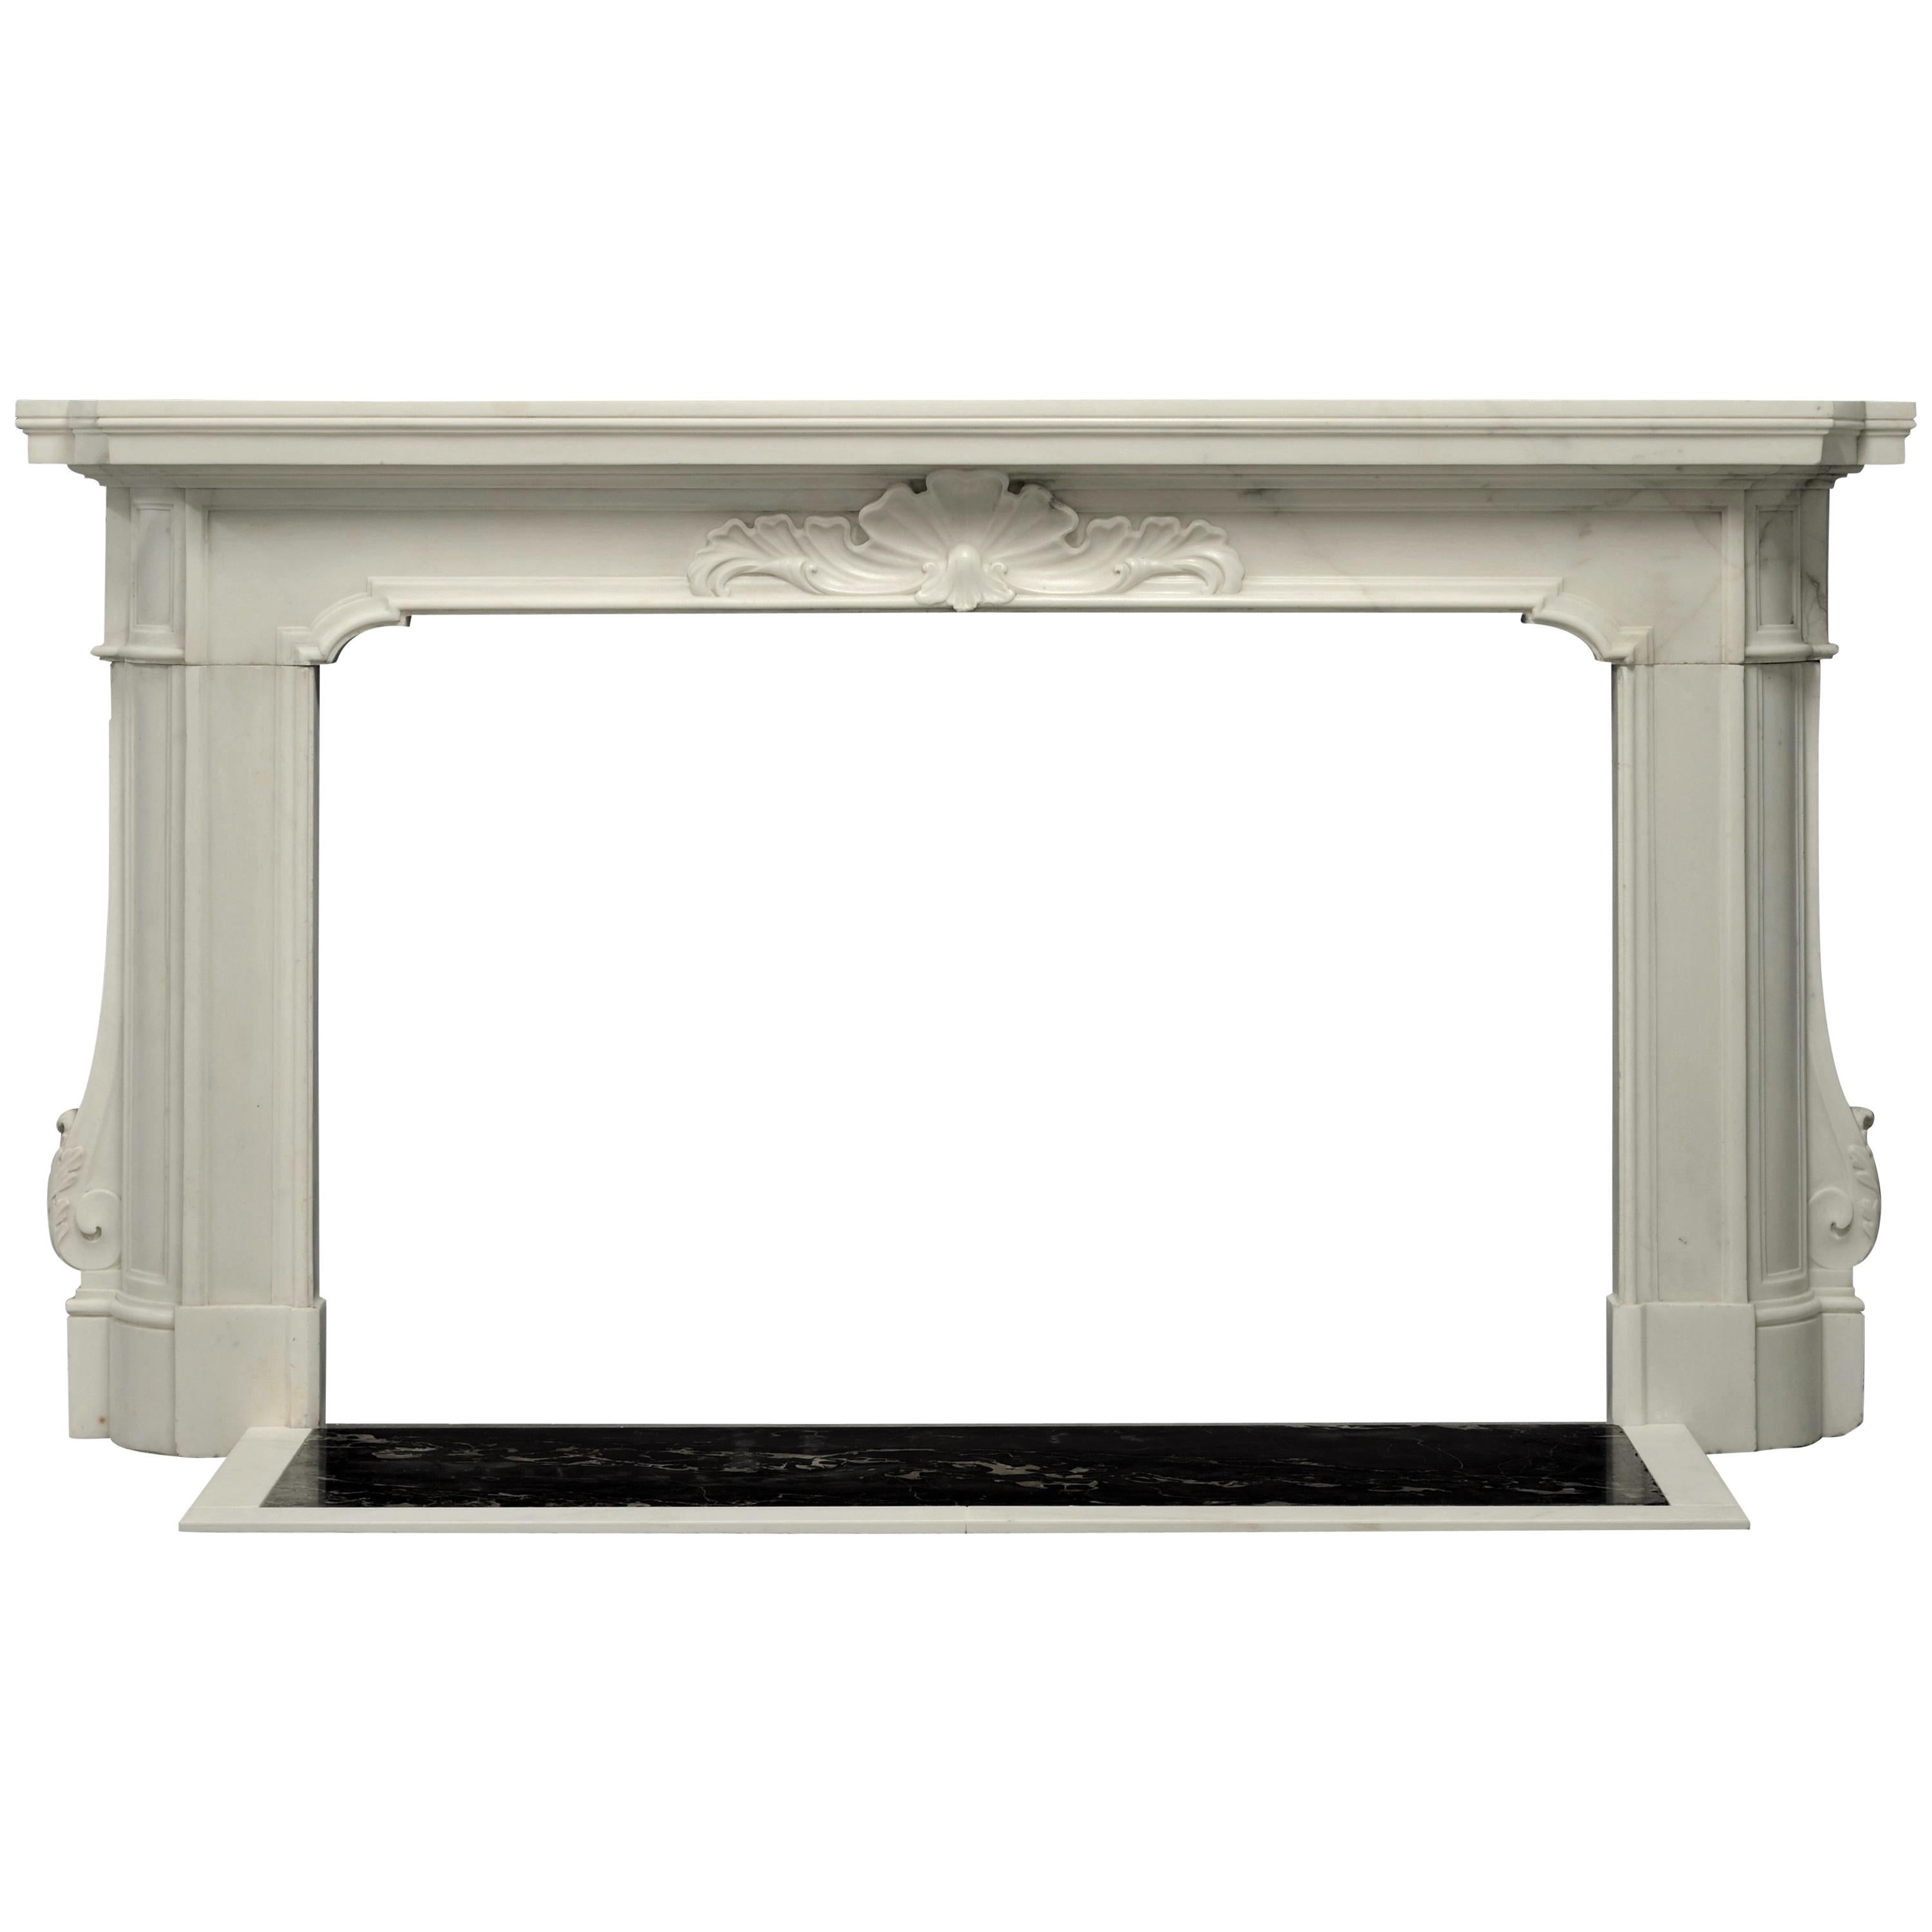 Striking 18th Century Italian Baroque Fireplace Mantel in Statuary Marble For Sale